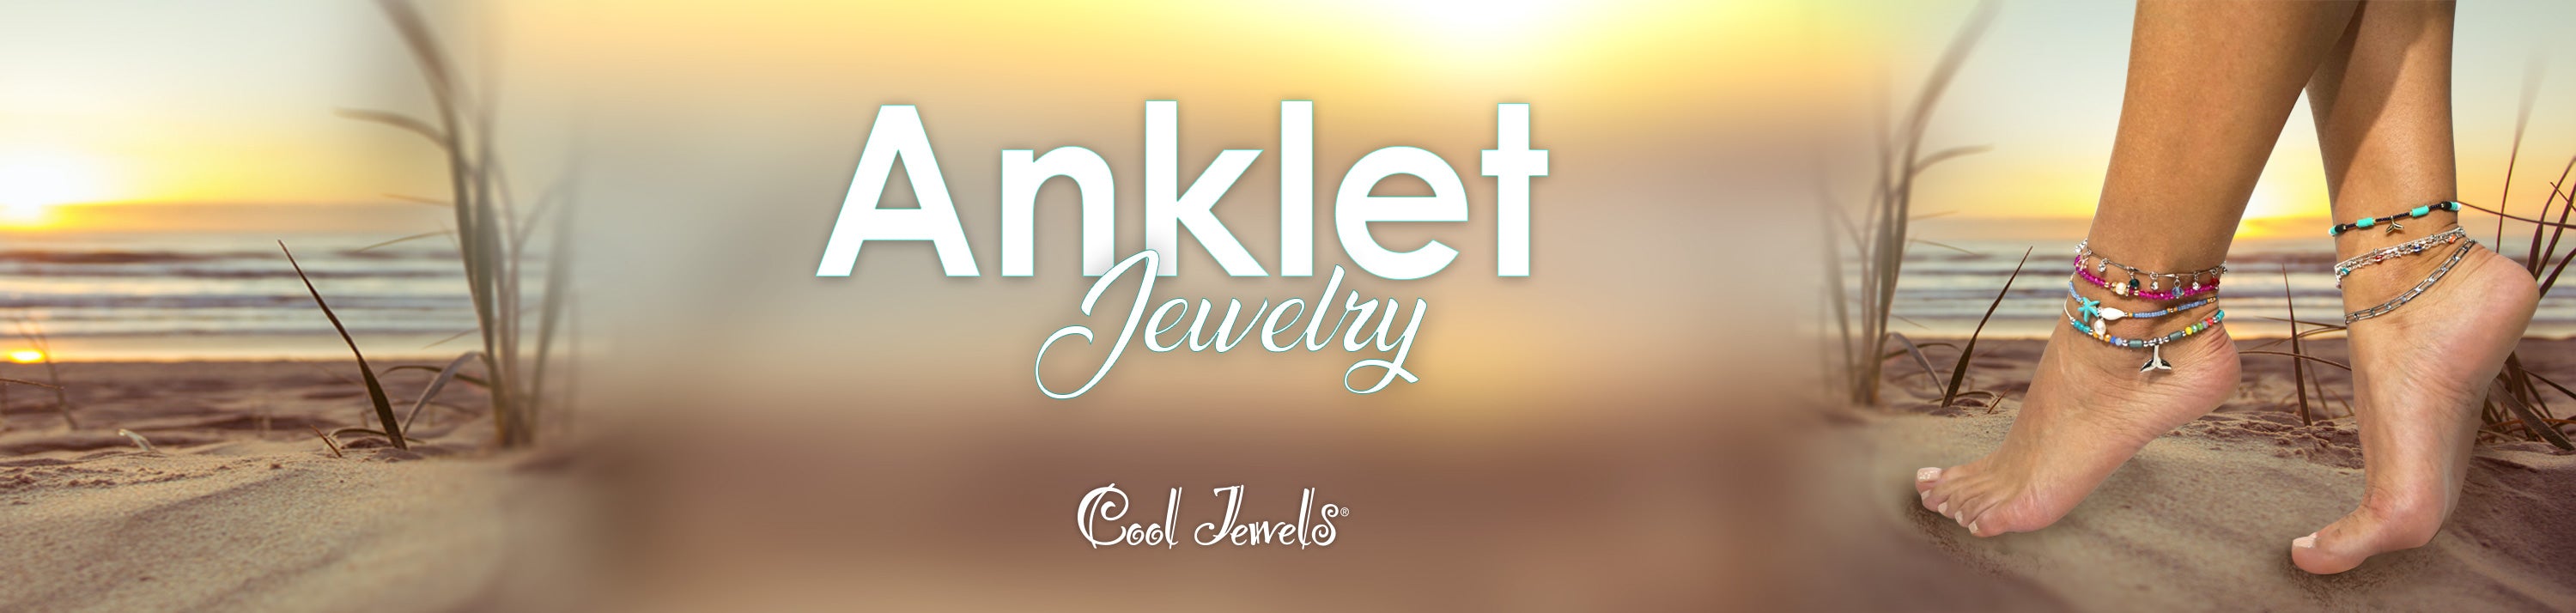 Anklet Jewelry | Cool Jewels